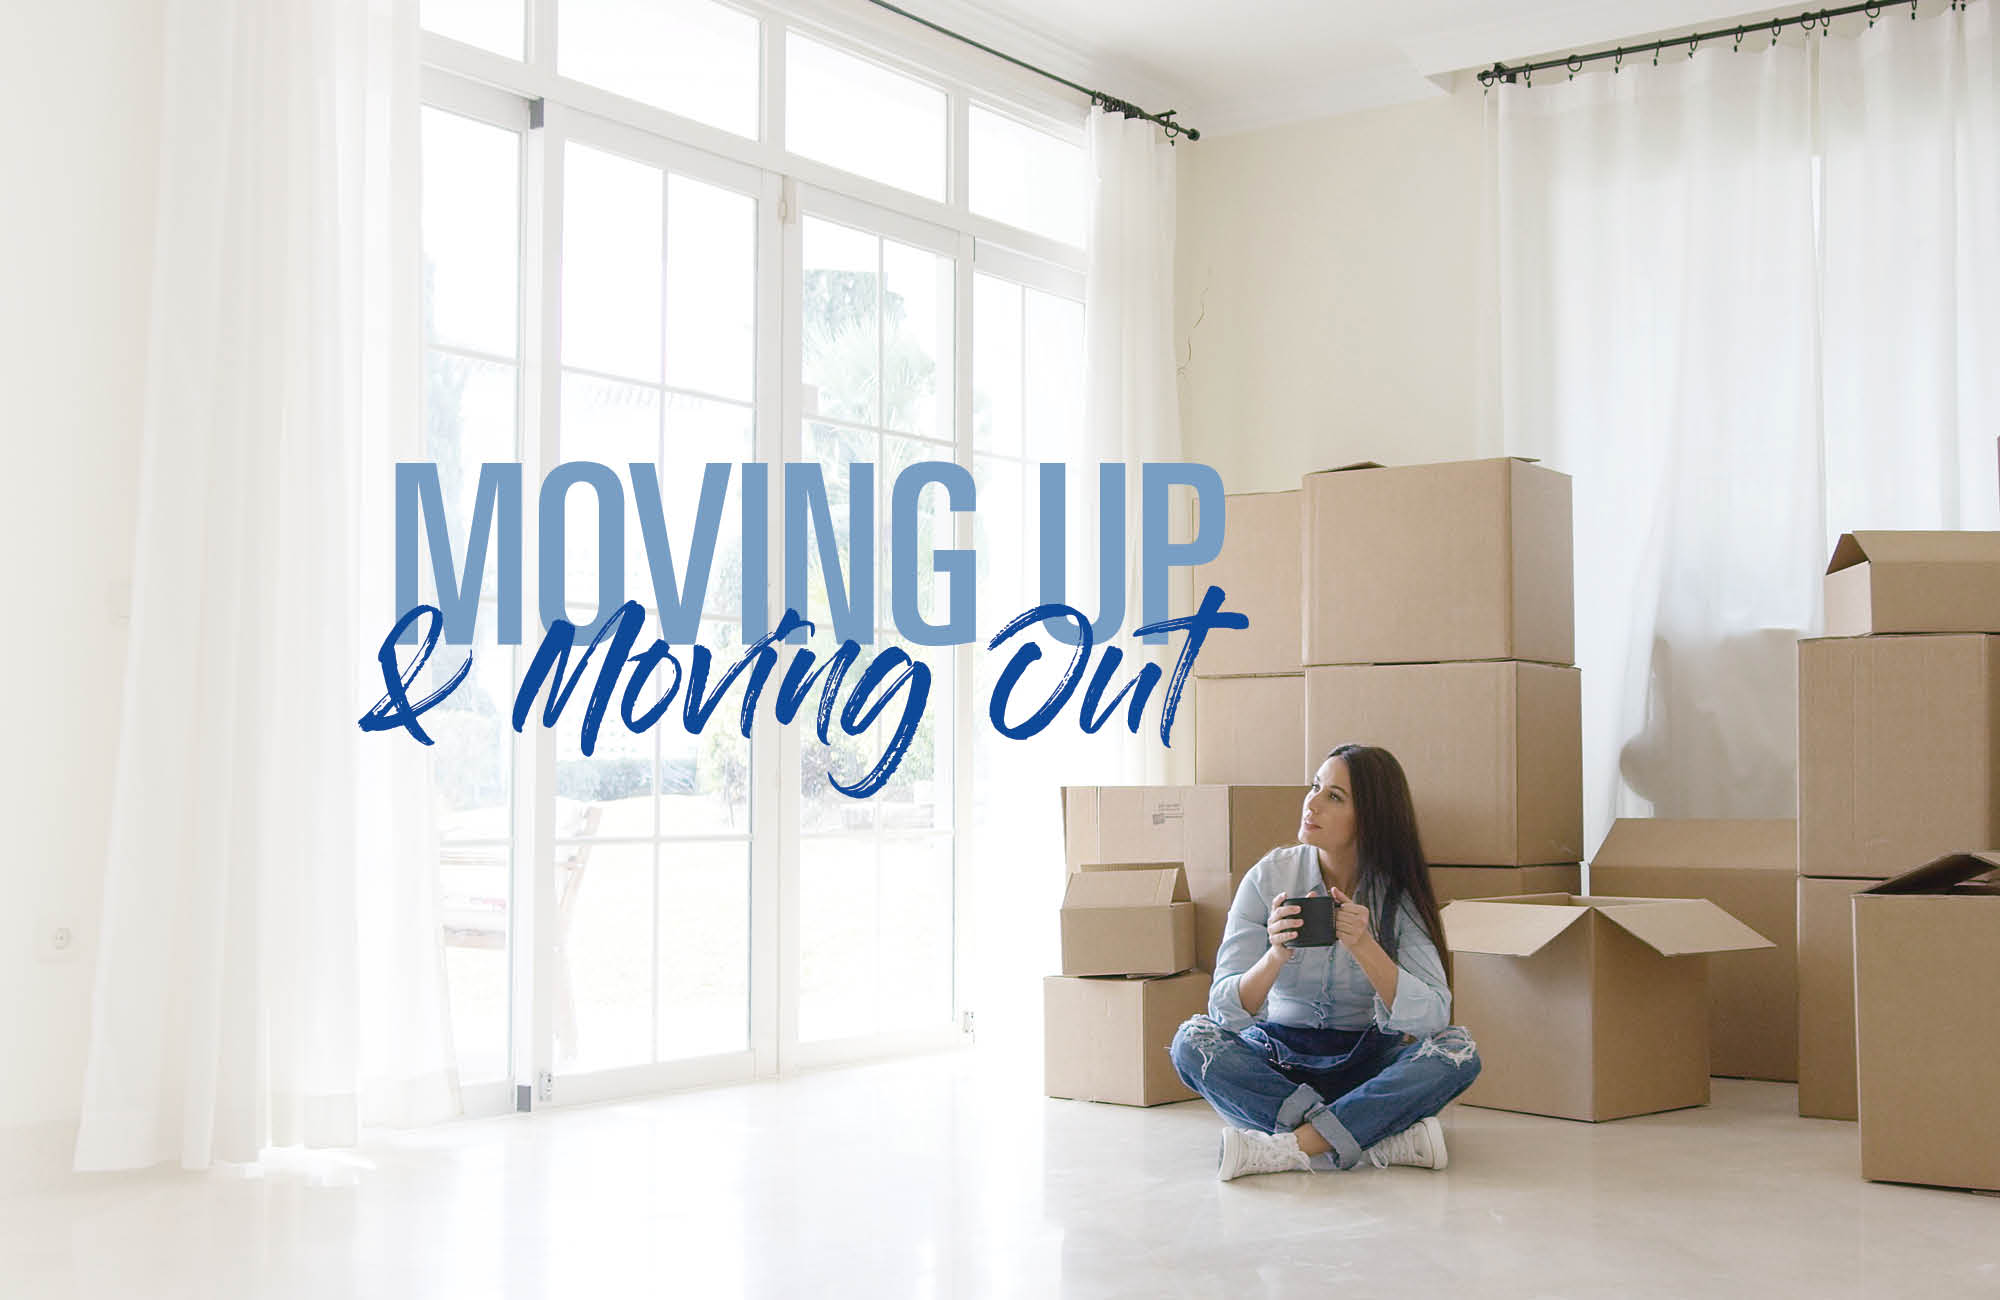 Moving Up & Moving Out